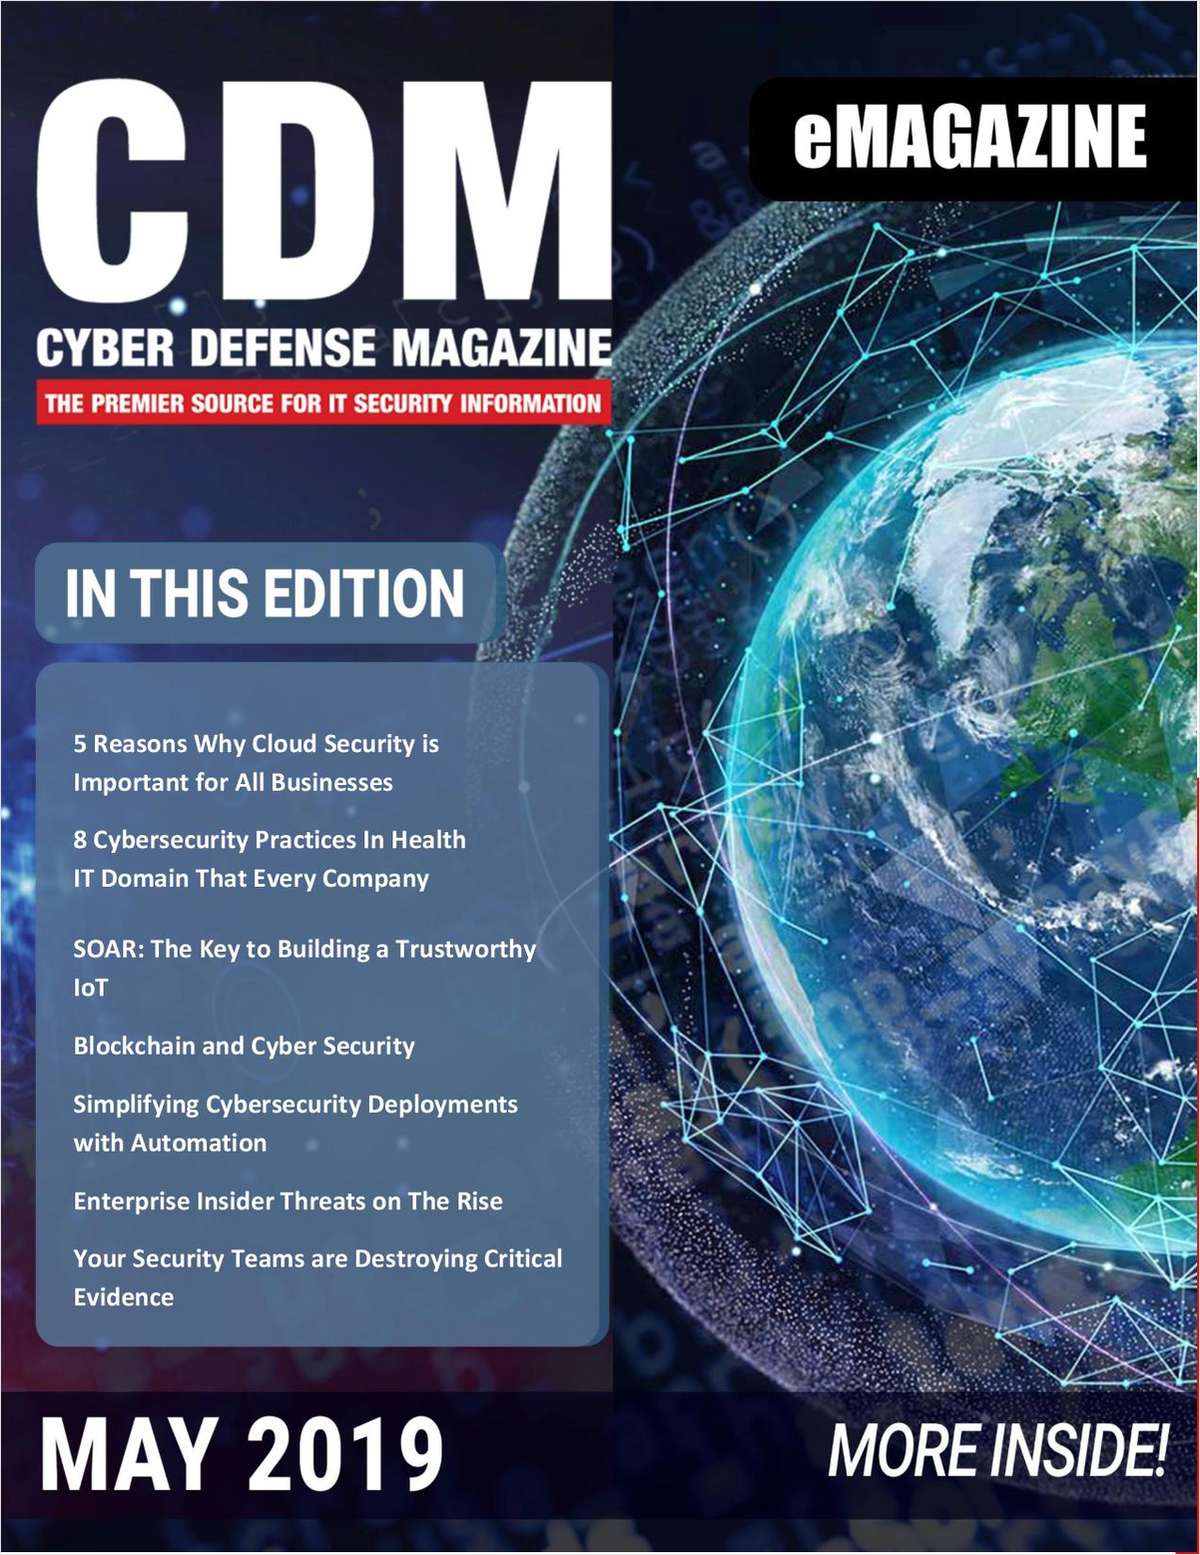 Cyber Defense eMagazine - May 2019 Edition